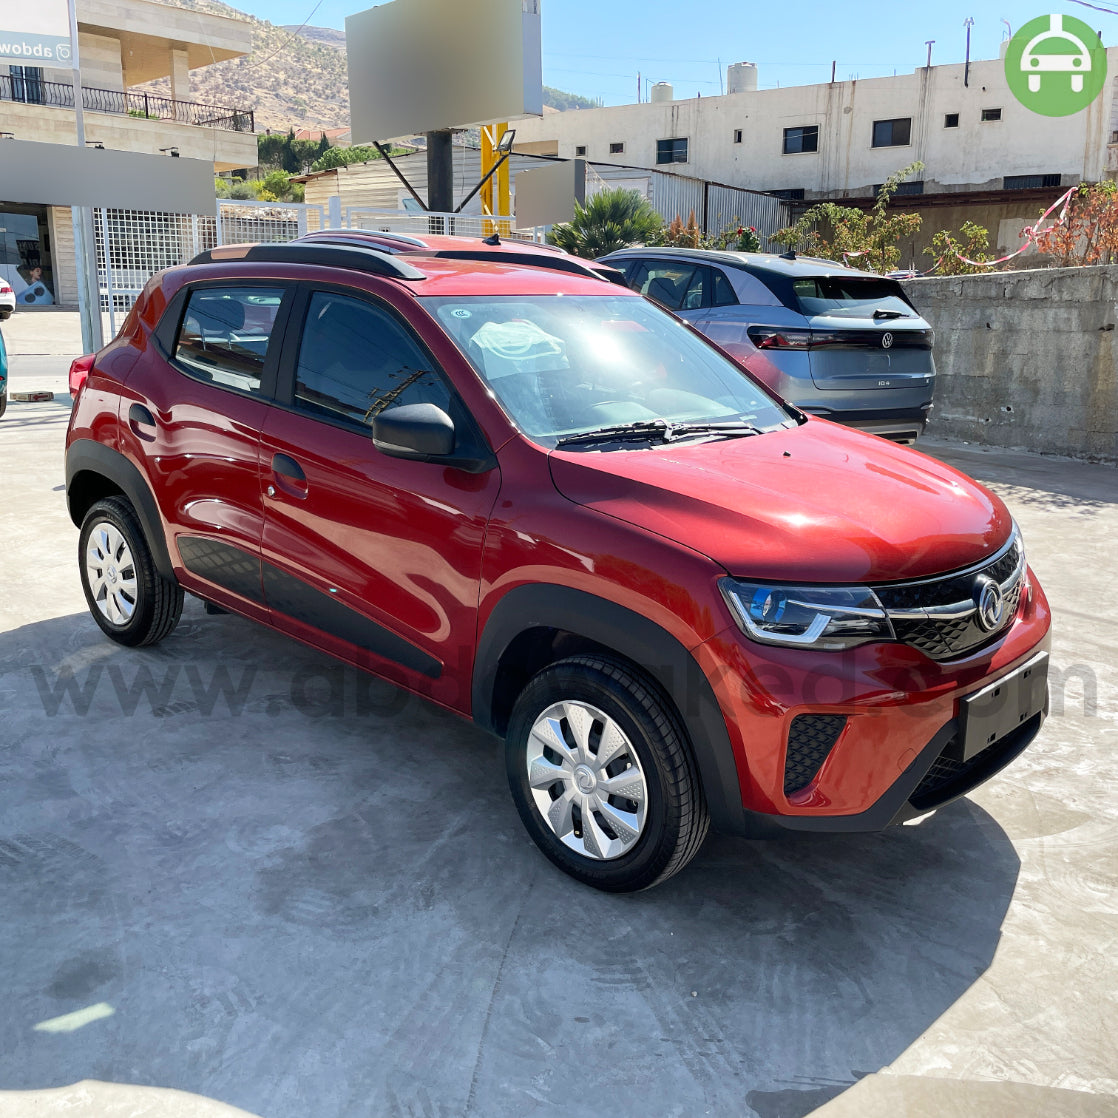 Dongfeng EX1 2022 Lava Red Color 300km Range/Charge Fully Electric Car (New - 0KM)